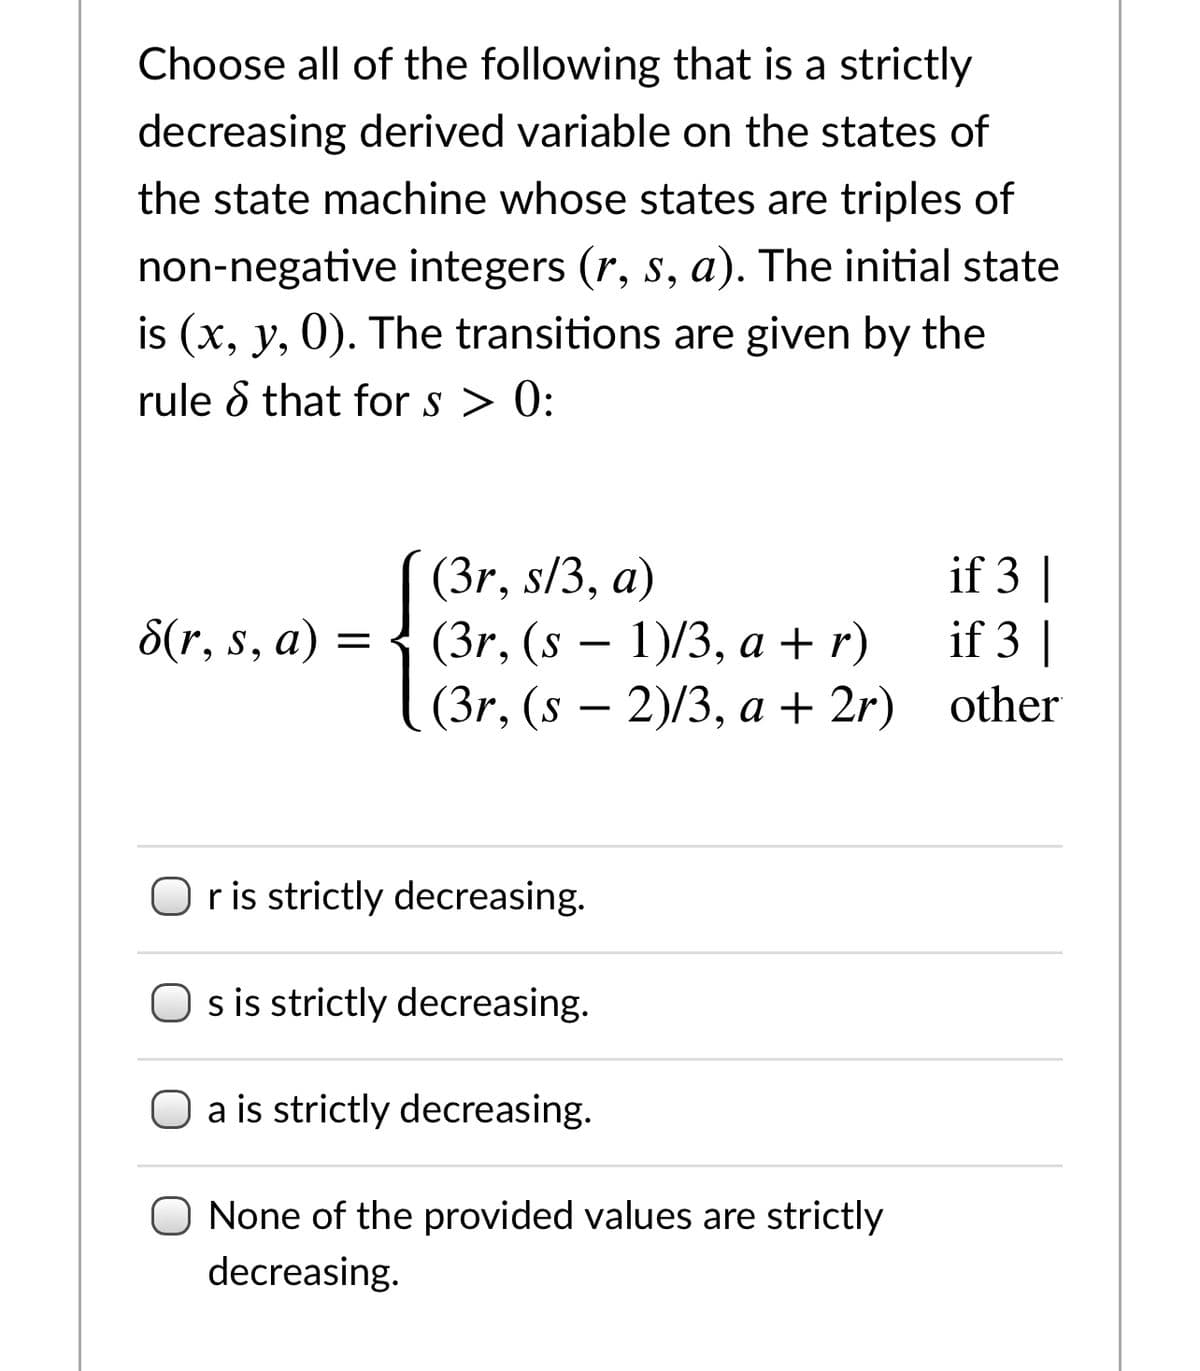 Choose all of the following that is a strictly
decreasing derived variable on the states of
the state machine whose states are triples of
non-negative integers (r, s, a). The initial state
is (x, y, 0). The transitions are given by the
rule d that for s > 0:
(3r, s/3, a)
(3r, (s – 1)/3, a + r)
(3r, (s — 2)/3, а + 2r) other
if 3 |
if 3 |
8(r, s, a)
Or is strictly decreasing.
s is strictly decreasing.
O a is strictly decreasing.
None of the provided values are strictly
decreasing.
